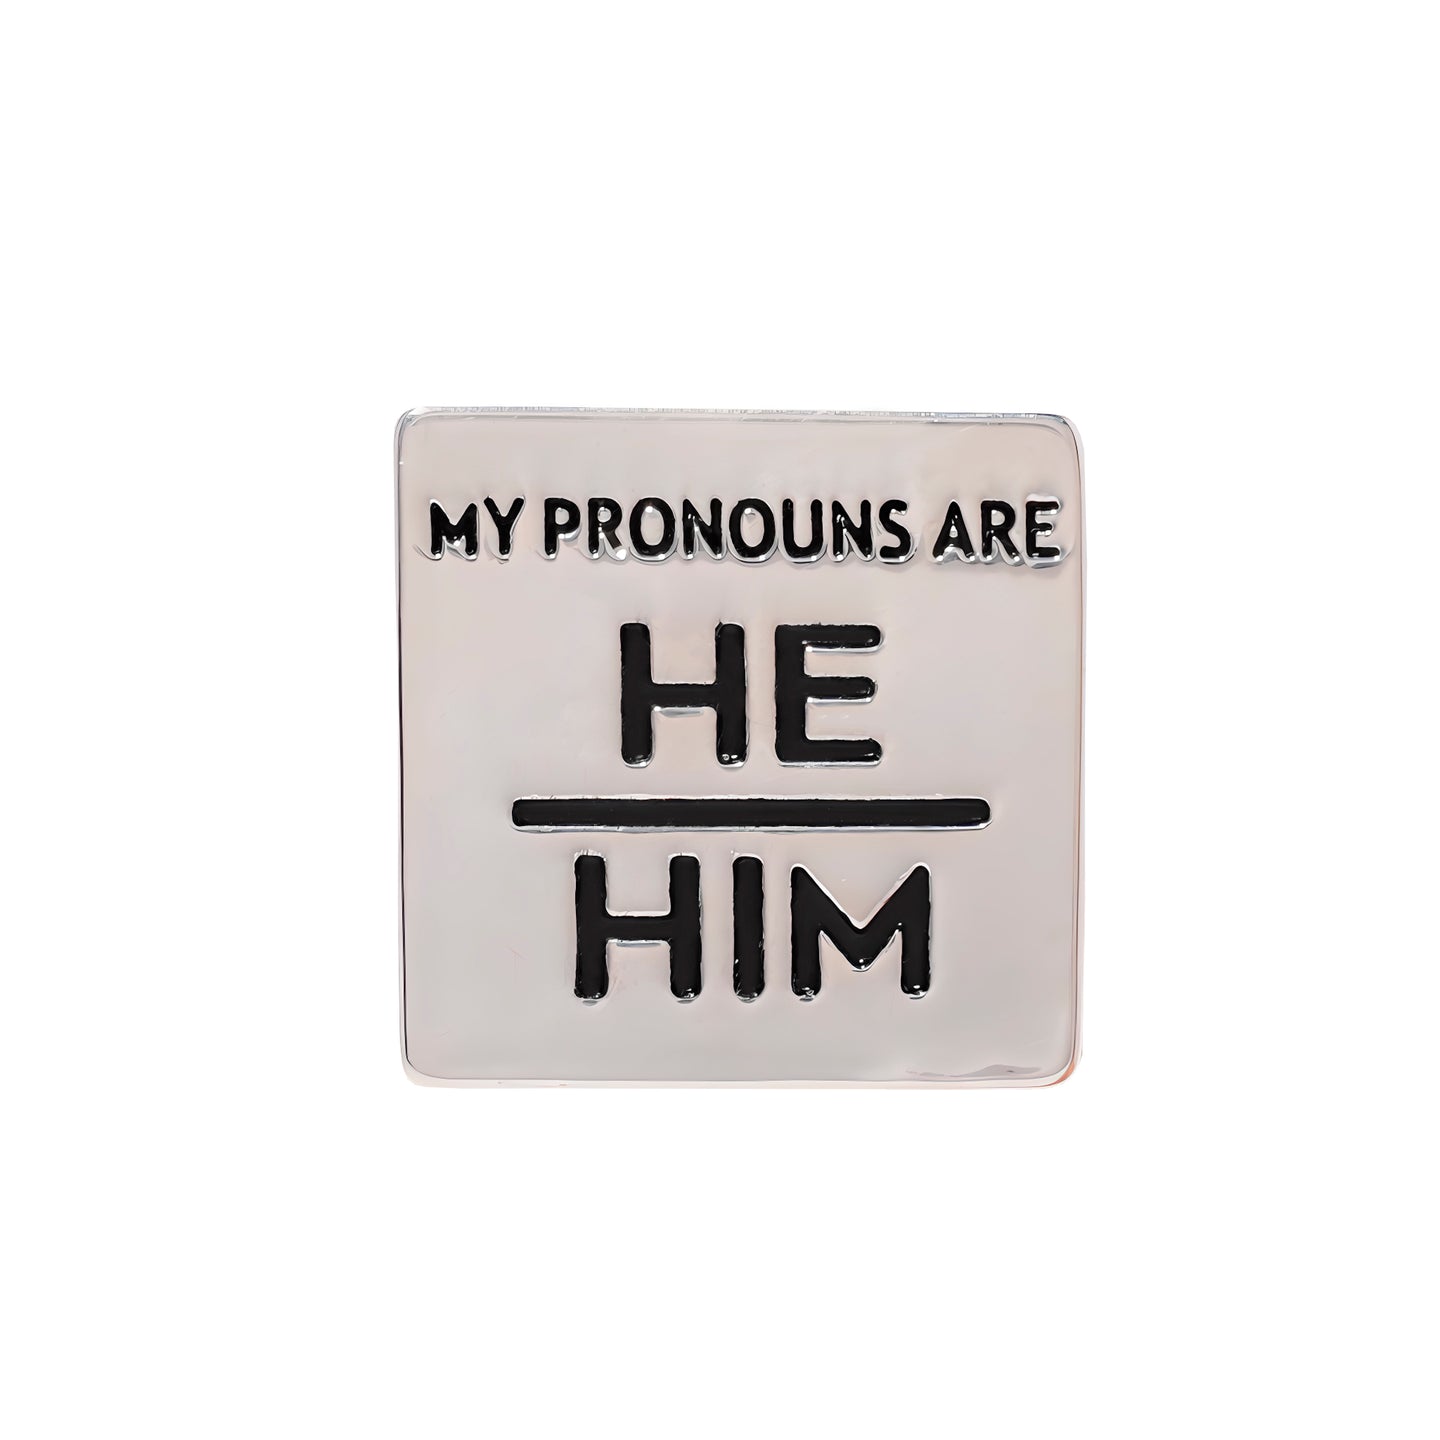 My Pronouns Are He Him Square Pins, Inexpensive Pride Jewelry